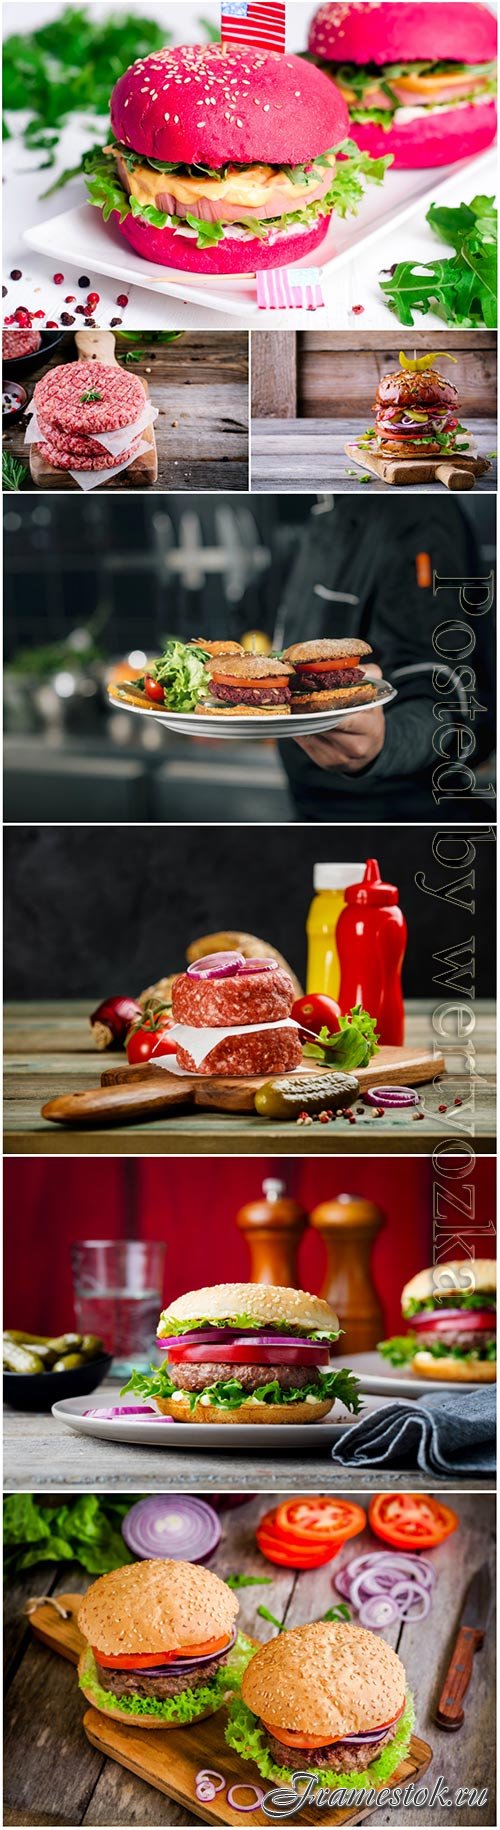 Burgers with fresh vegetables stock photo